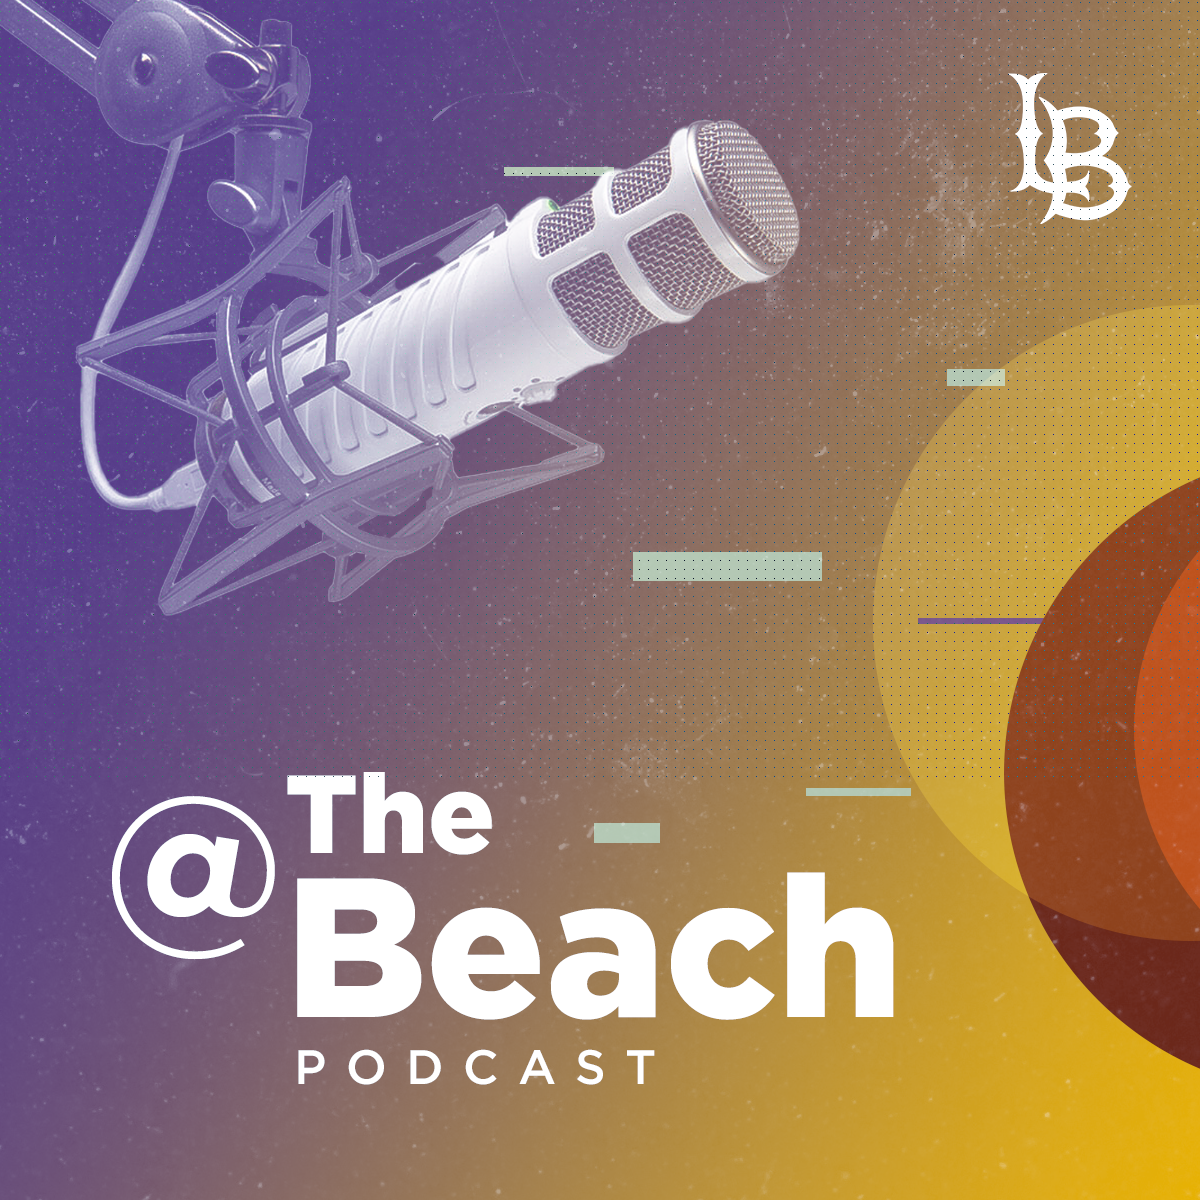 At The Beach Podcast